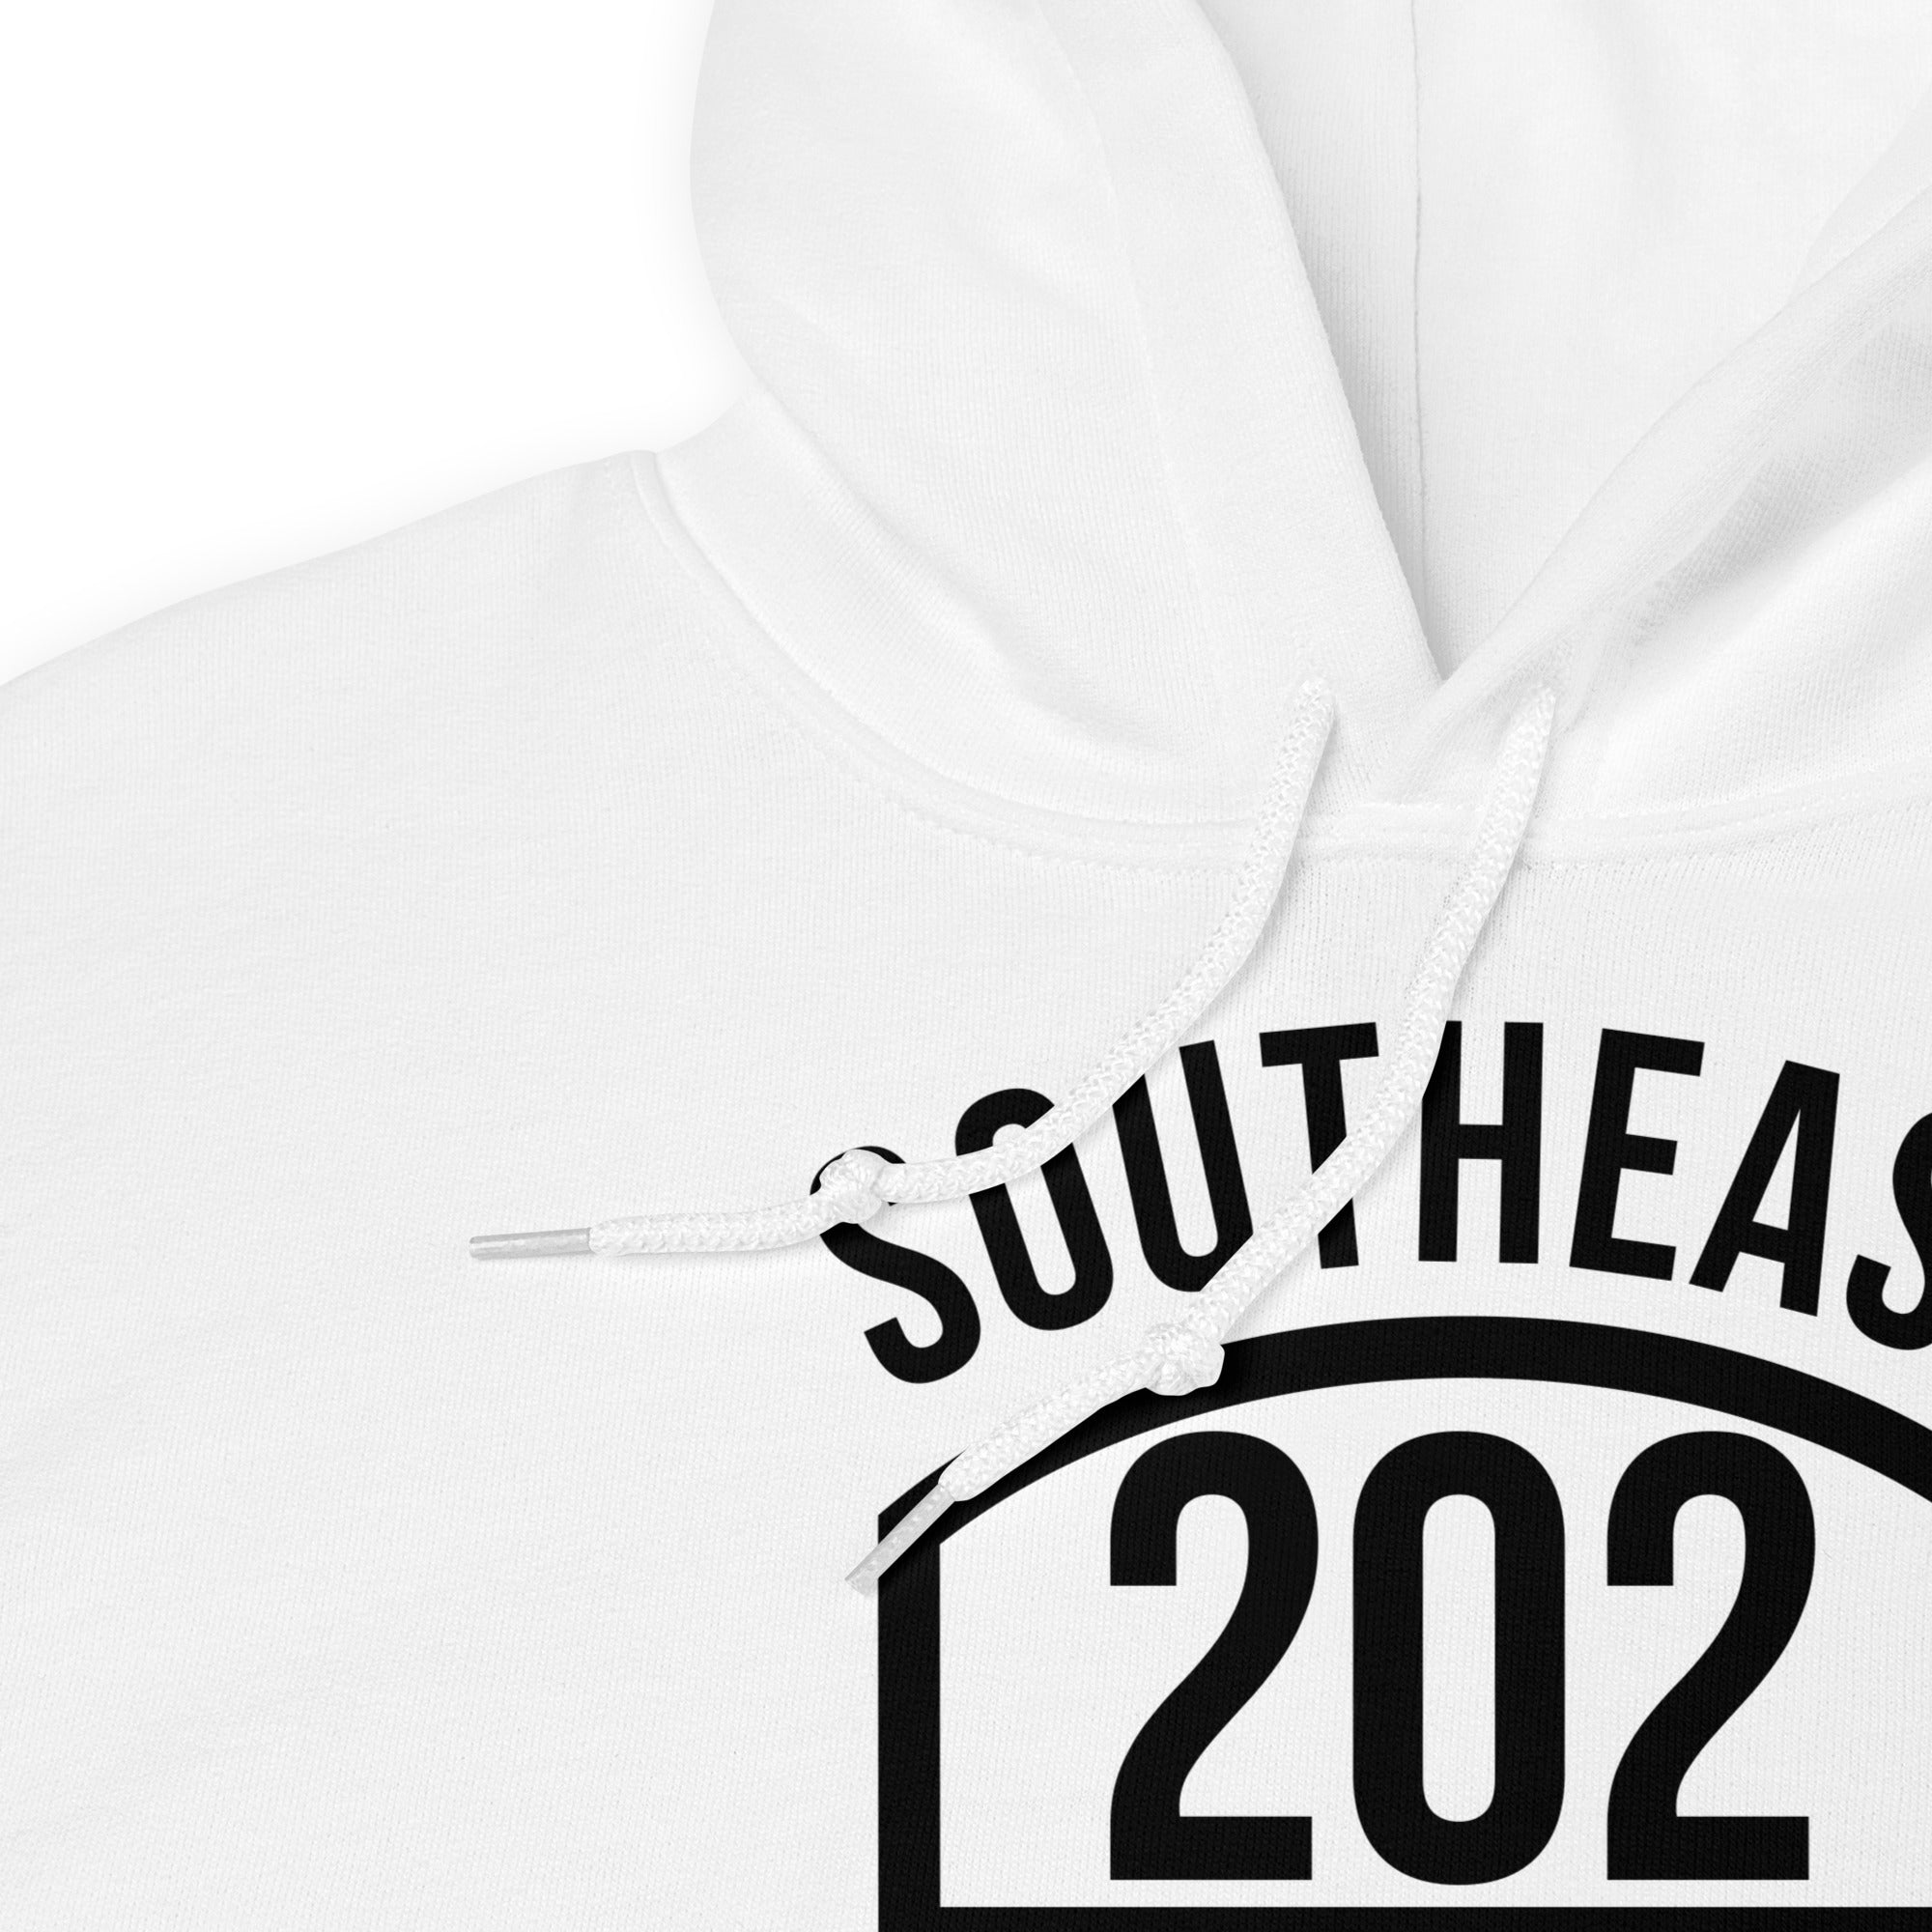 ' SOUTHEAST DC / 202"  White Cotton Hoodie (Unisex w EOTR on the sleeve)